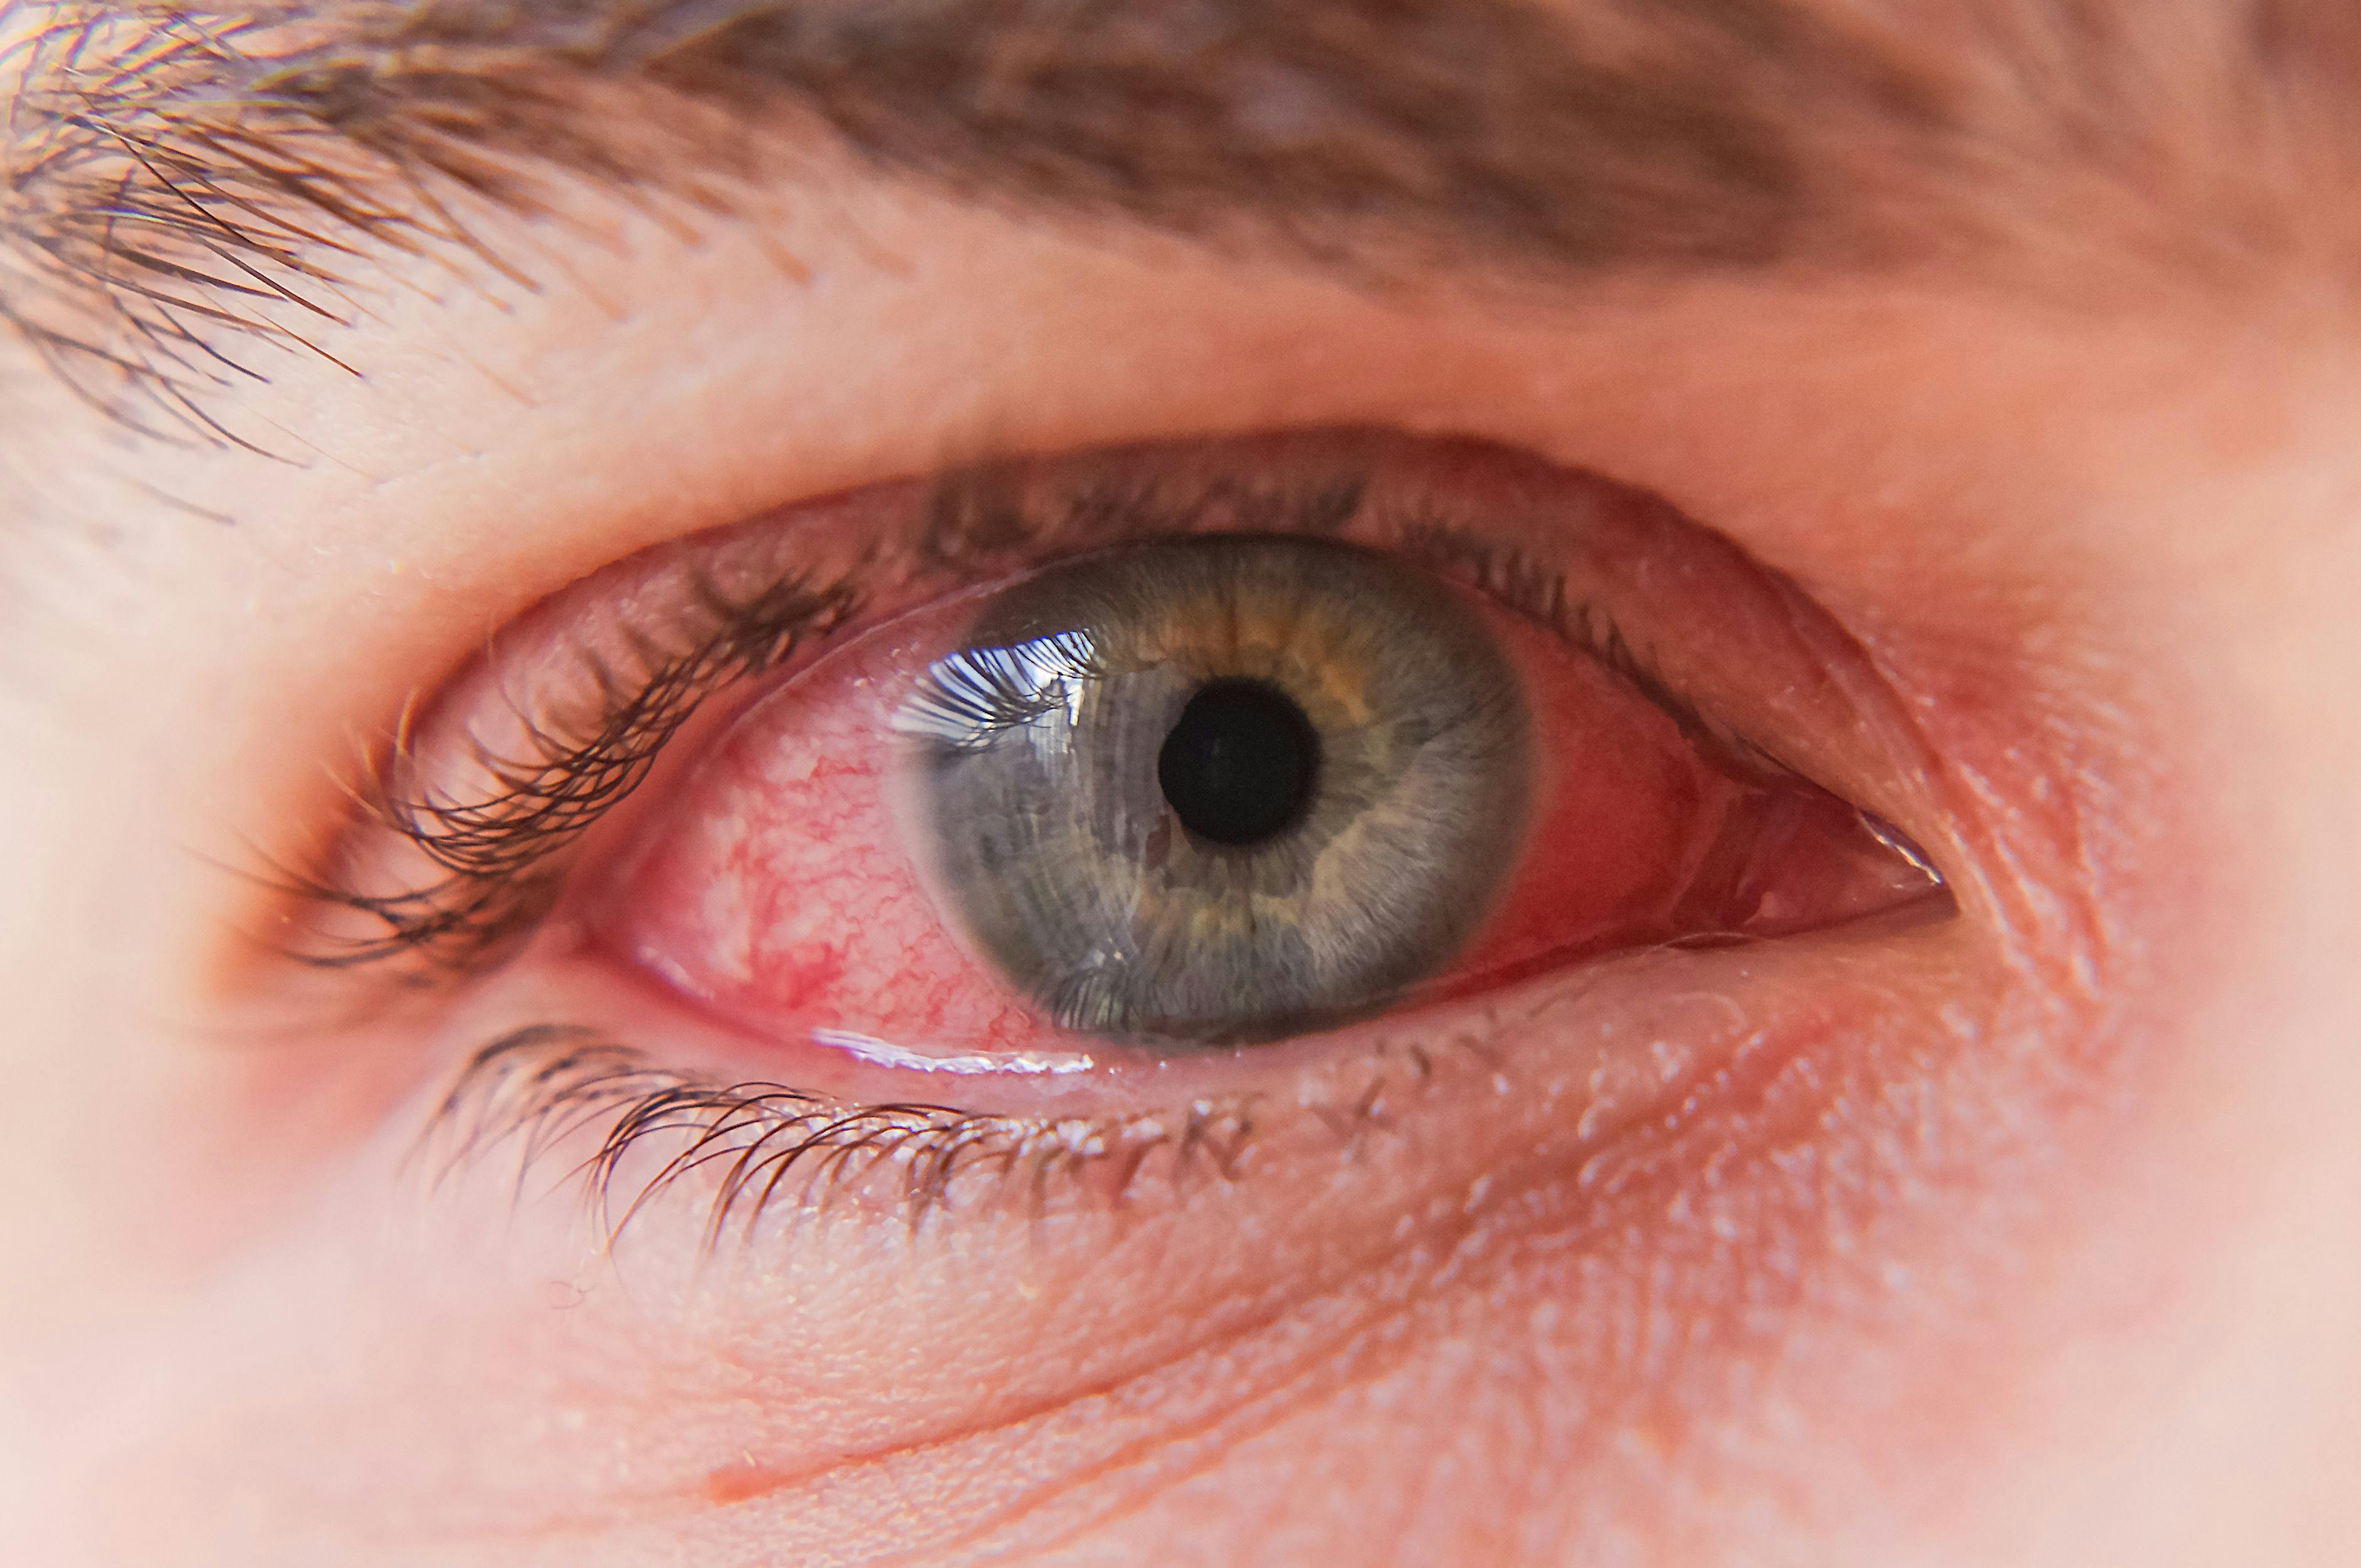 Tralokinumab Linked to Ocular Diseases in Patients with Atopic Dermatitis